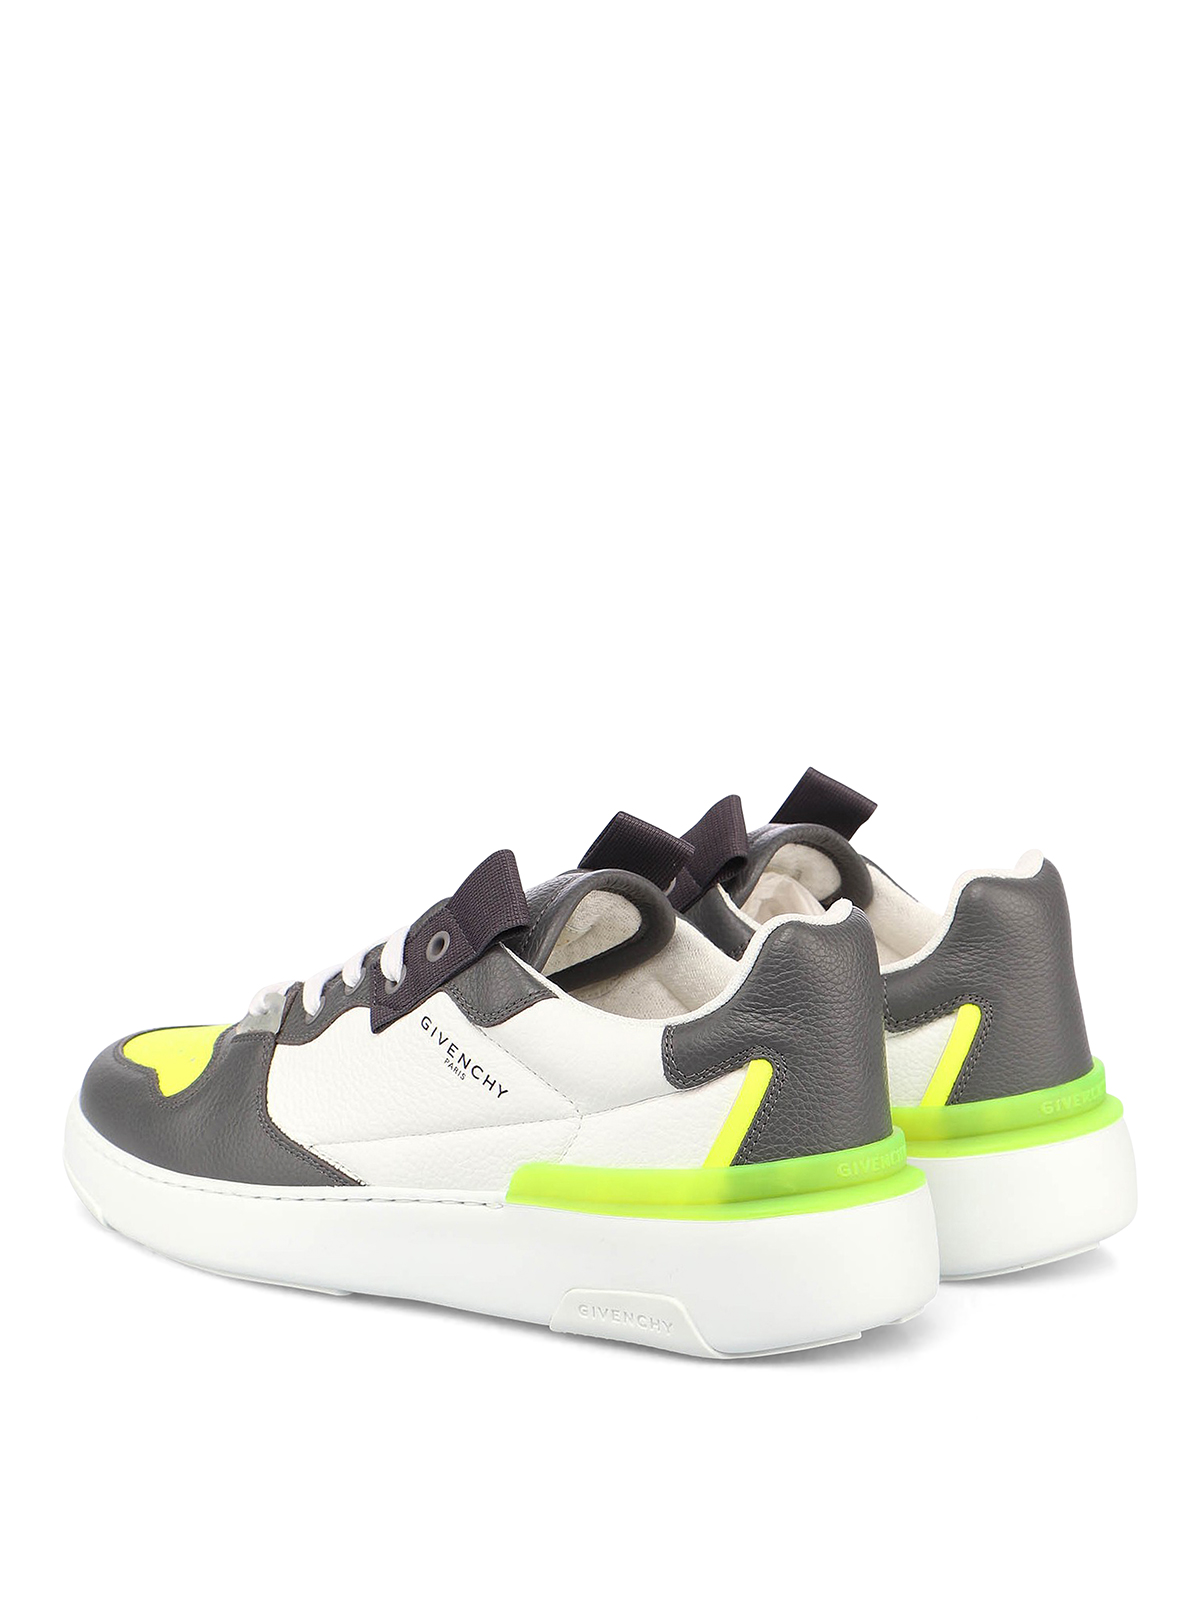 Givenchy - Wing low top sneakers - trainers - BH002KH0SN069 | iKRIX.com